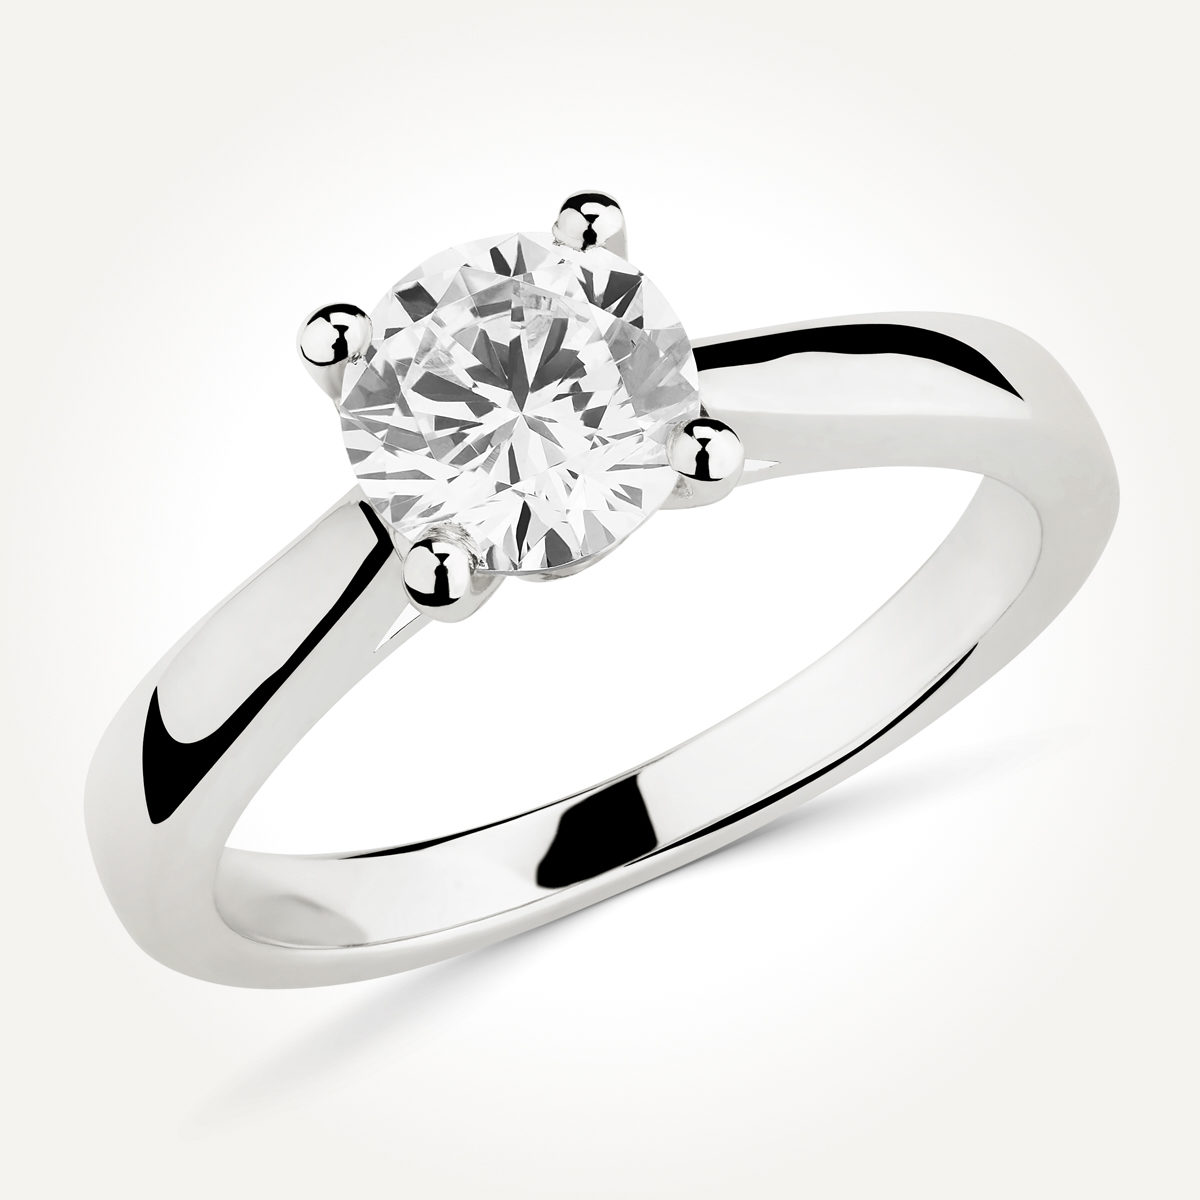 Solitaire Diamond Engagement Ring - Style 70980